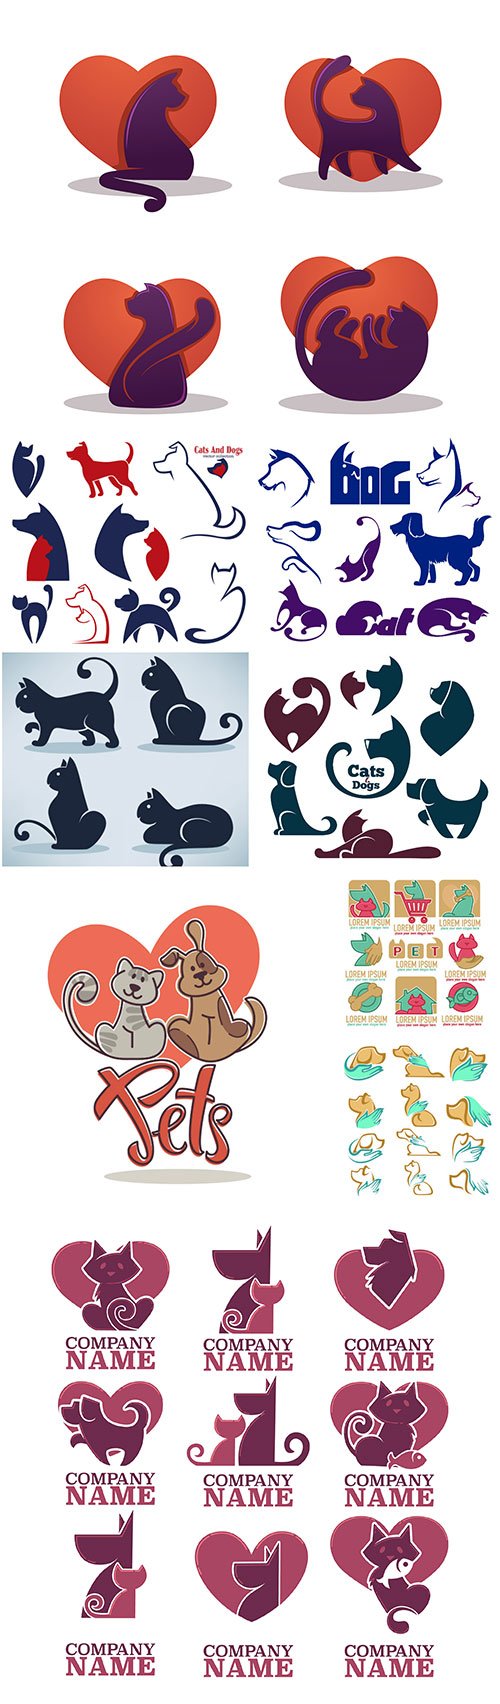 Lovely pets, vector collection of dog images for your logo